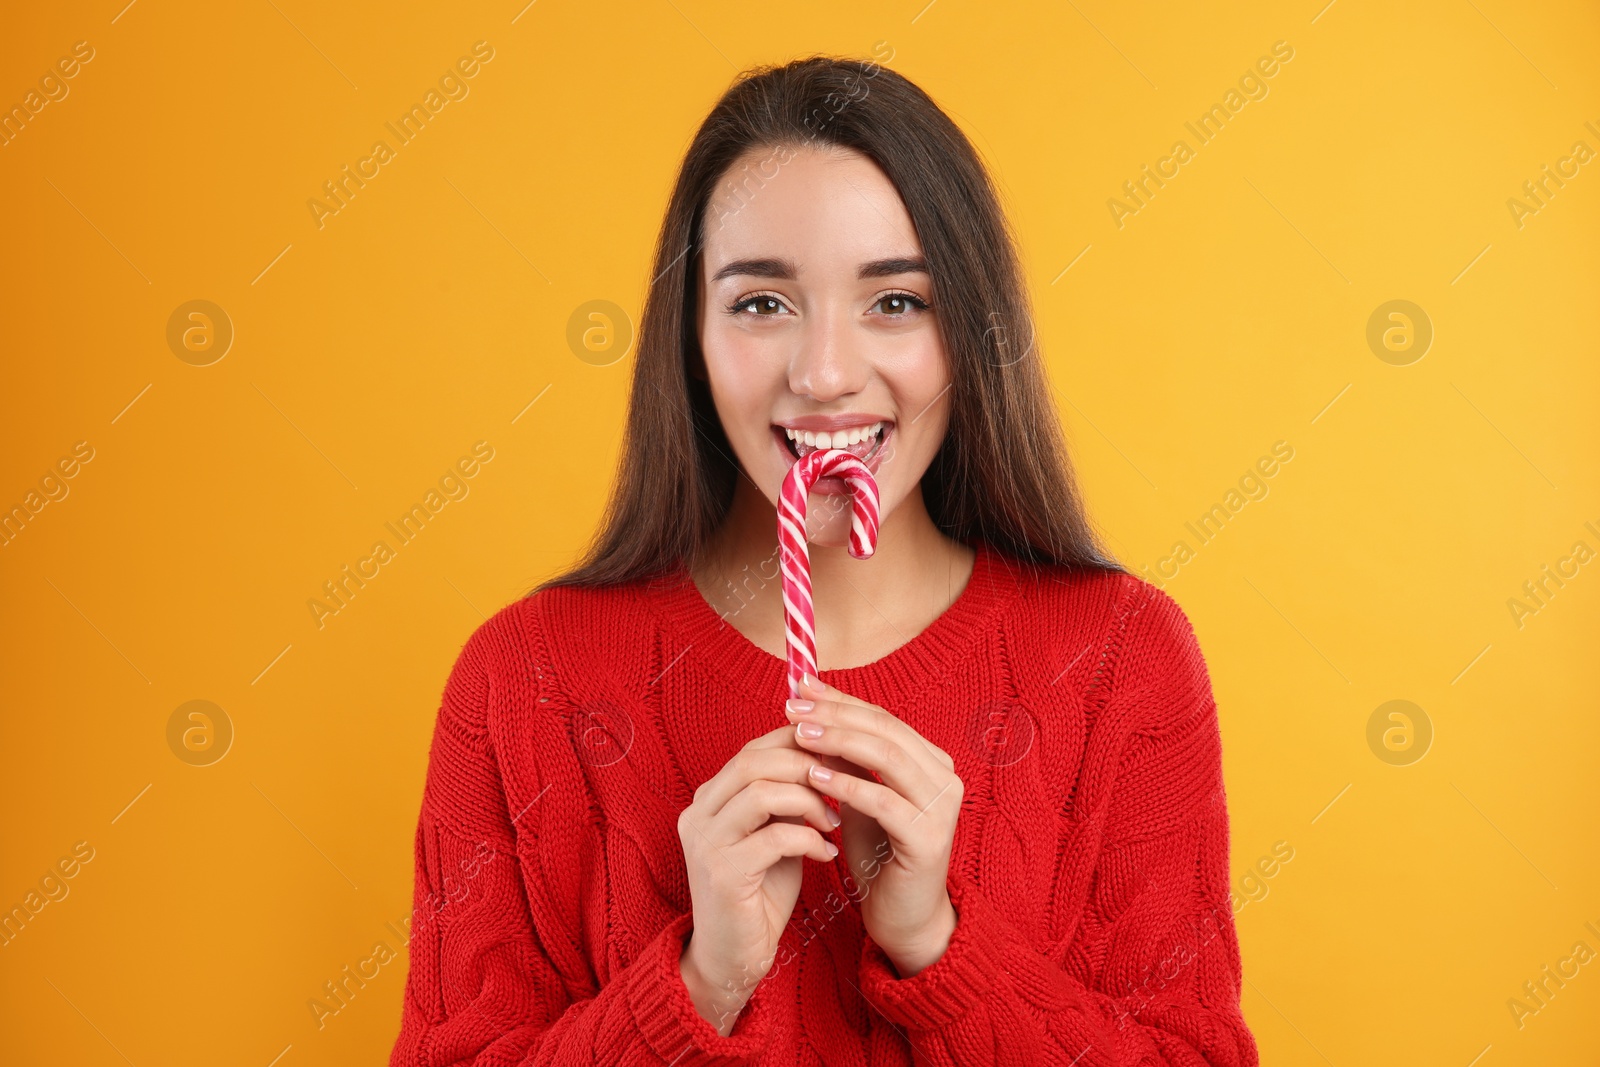 Photo of Young woman in red sweater holding candy cane on yellow background. Celebrating Christmas